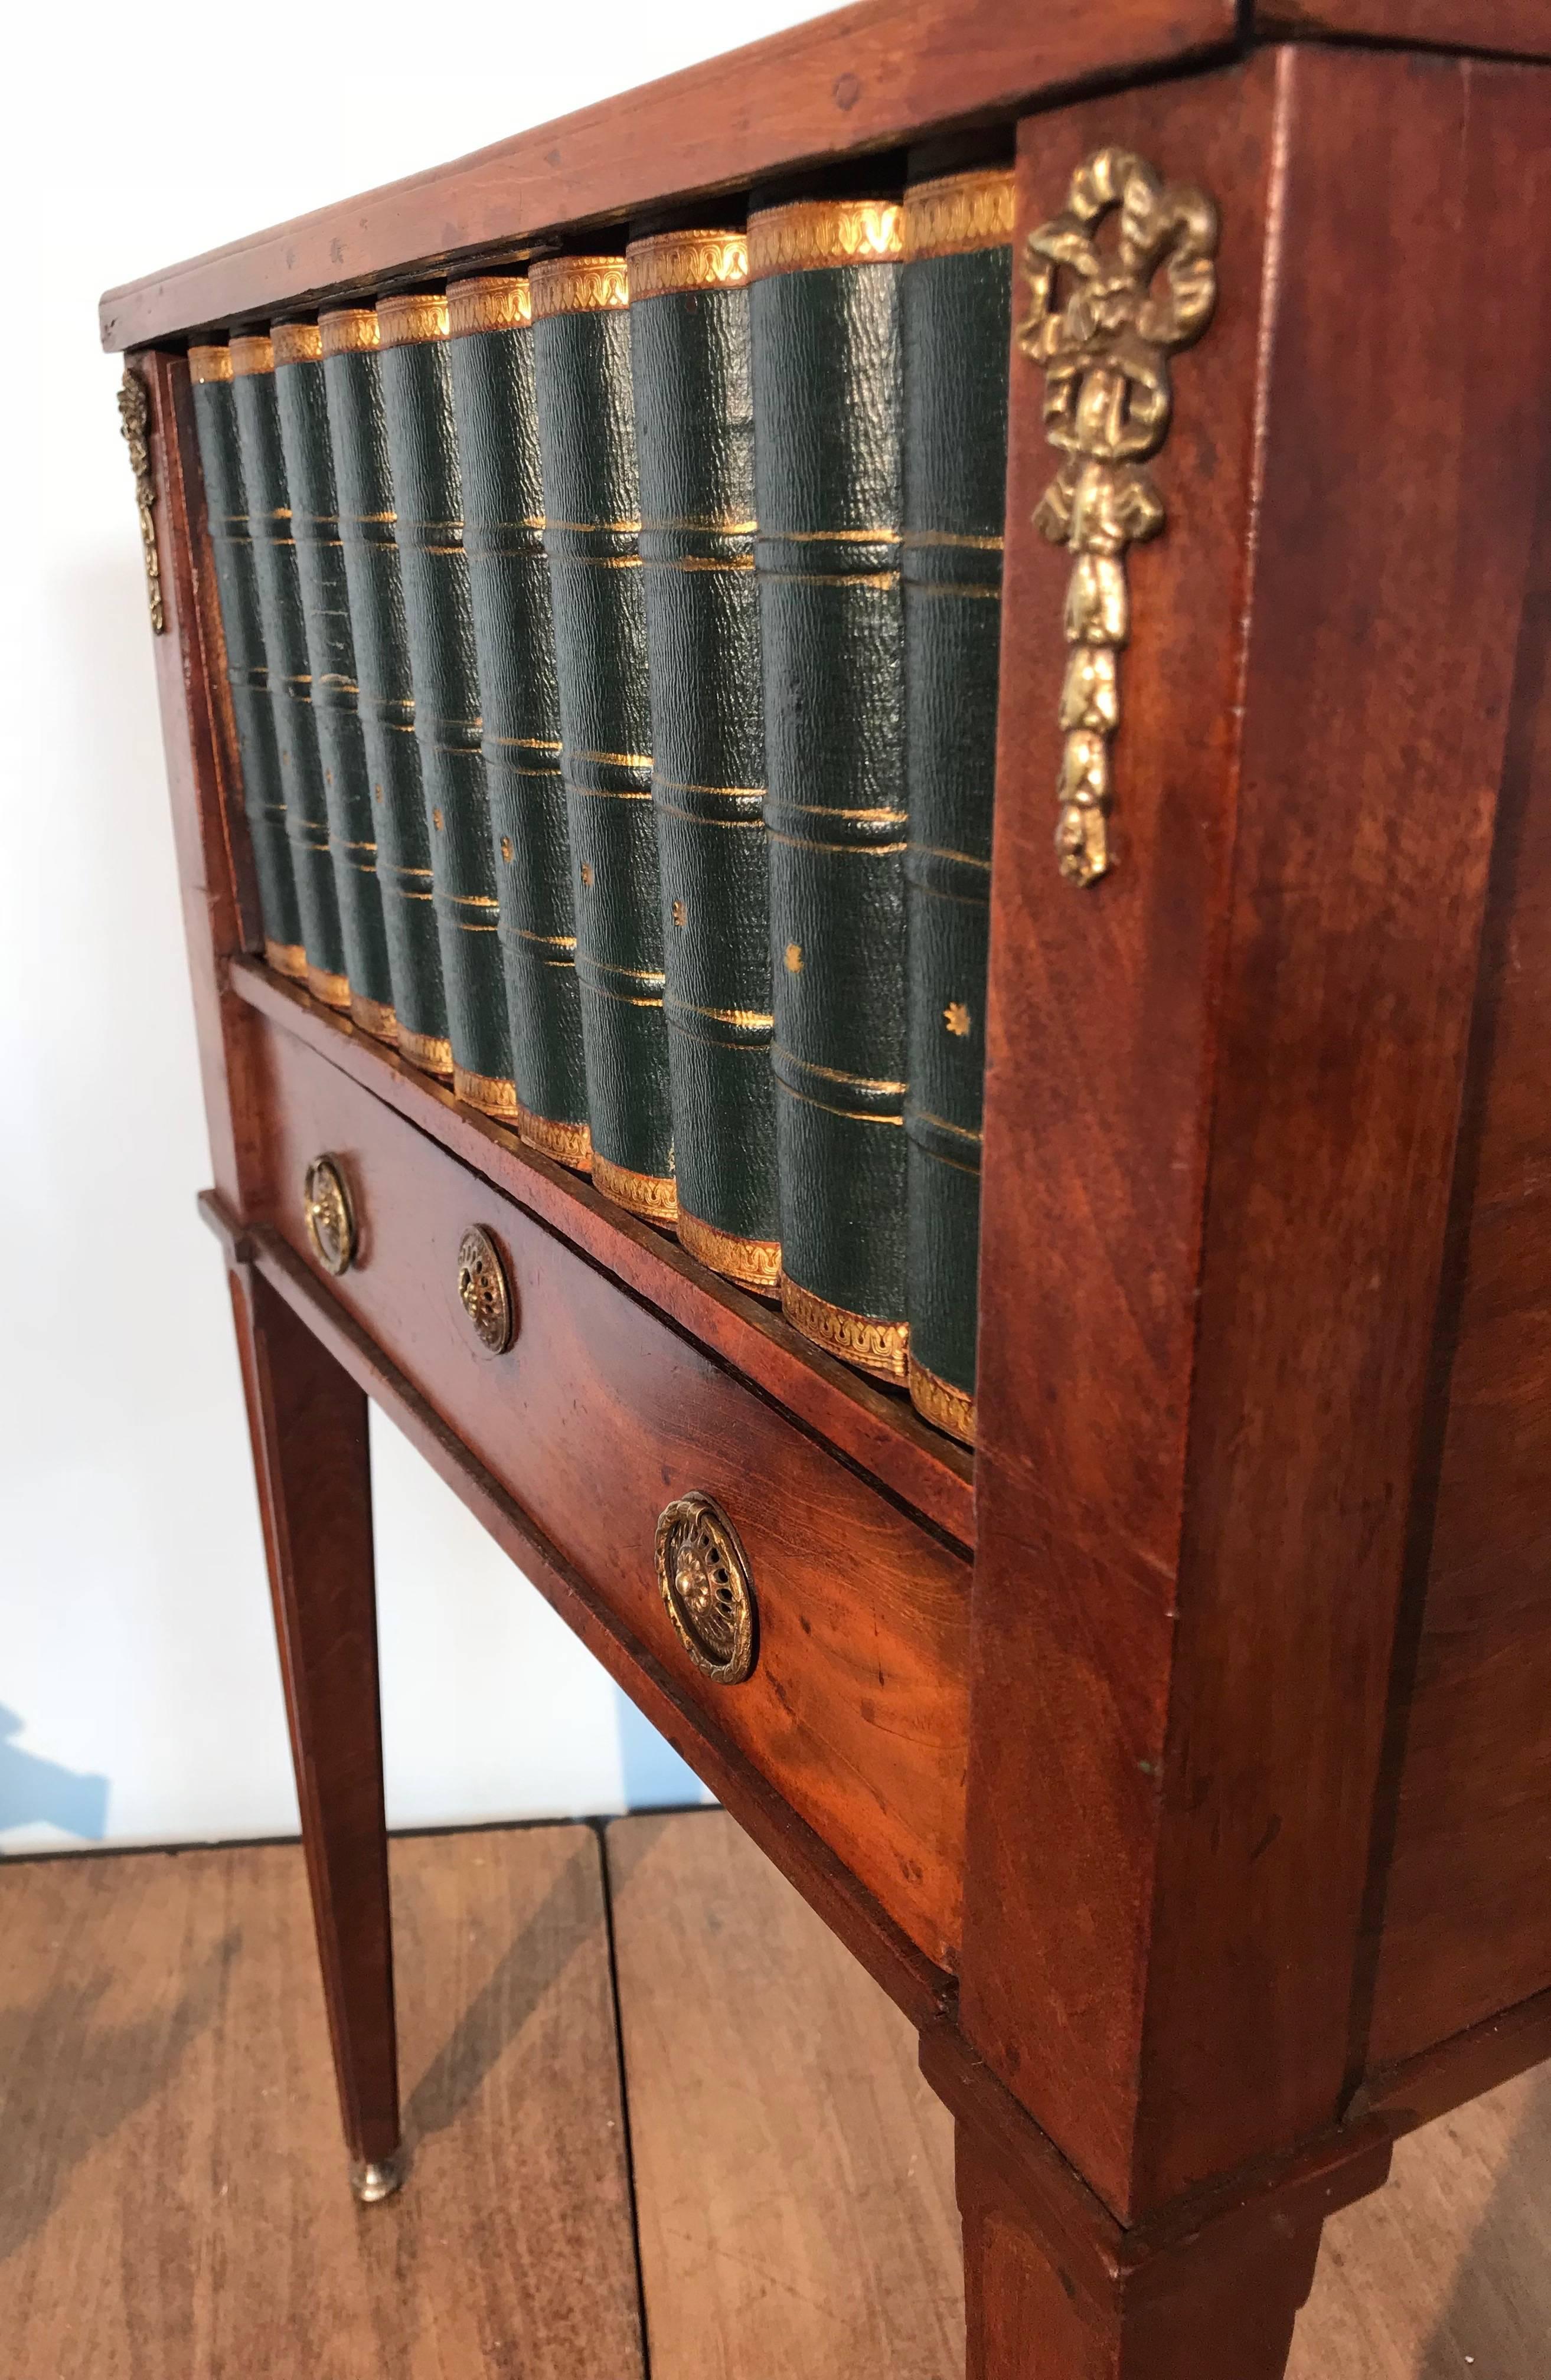 Gilt Empire Style Mahogany End Table with Faux Books Rolling Shutter Door and Drawer